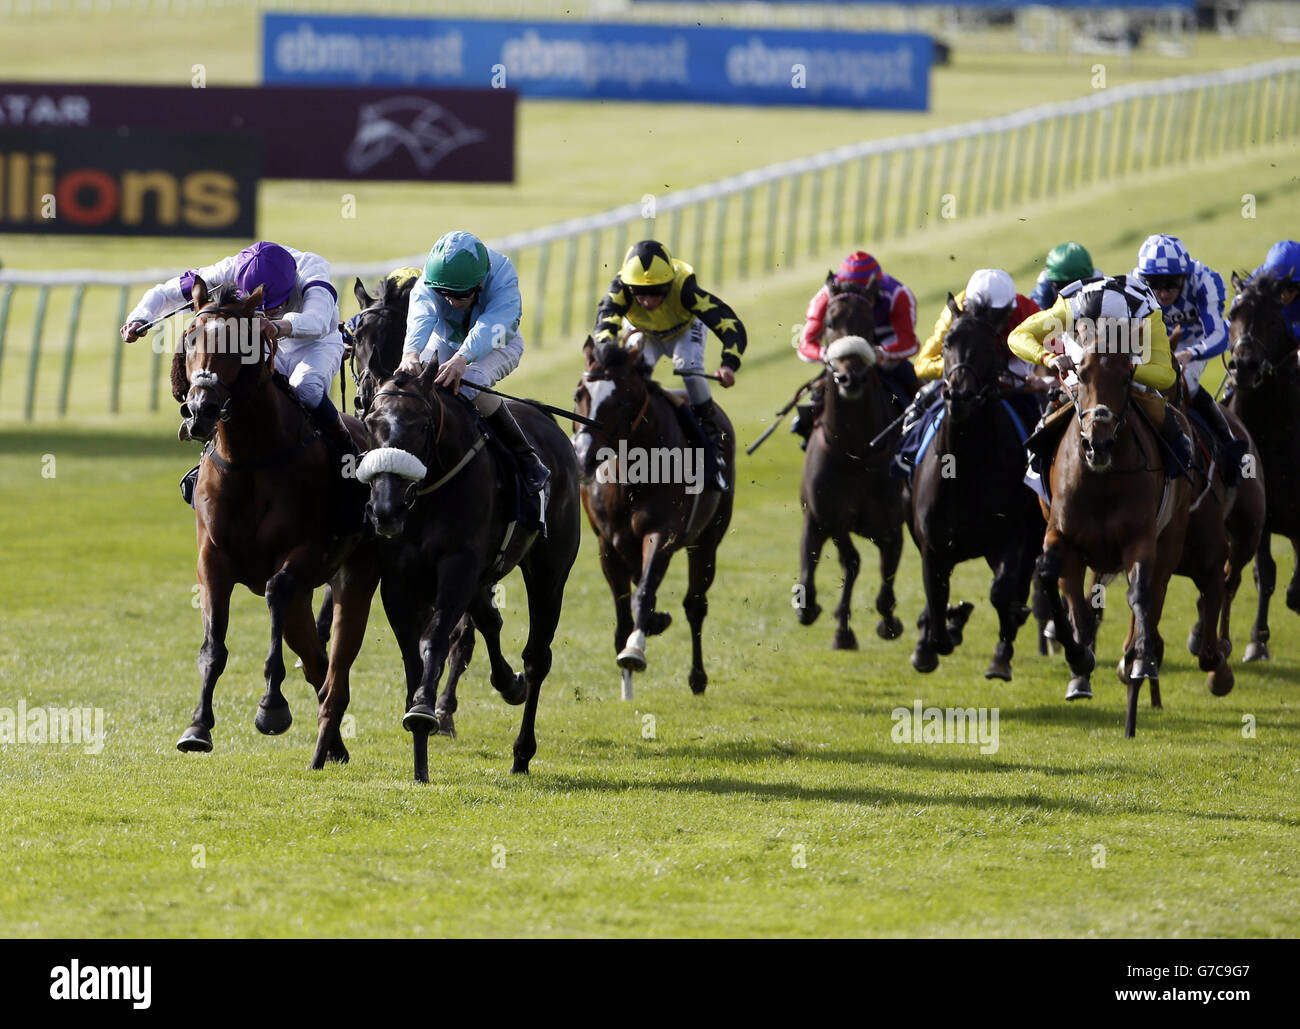 Der Meister (centre in light blue and green colours) ridden by David Probert beats Knife Point (left) ridden by James Doyle to win the TurfTrax.co.uk Sectional Timing At Newmarket Handicap Stakes during day one of the The Cambridgeshire Meeting at Newmarket Racecourse. Stock Photo